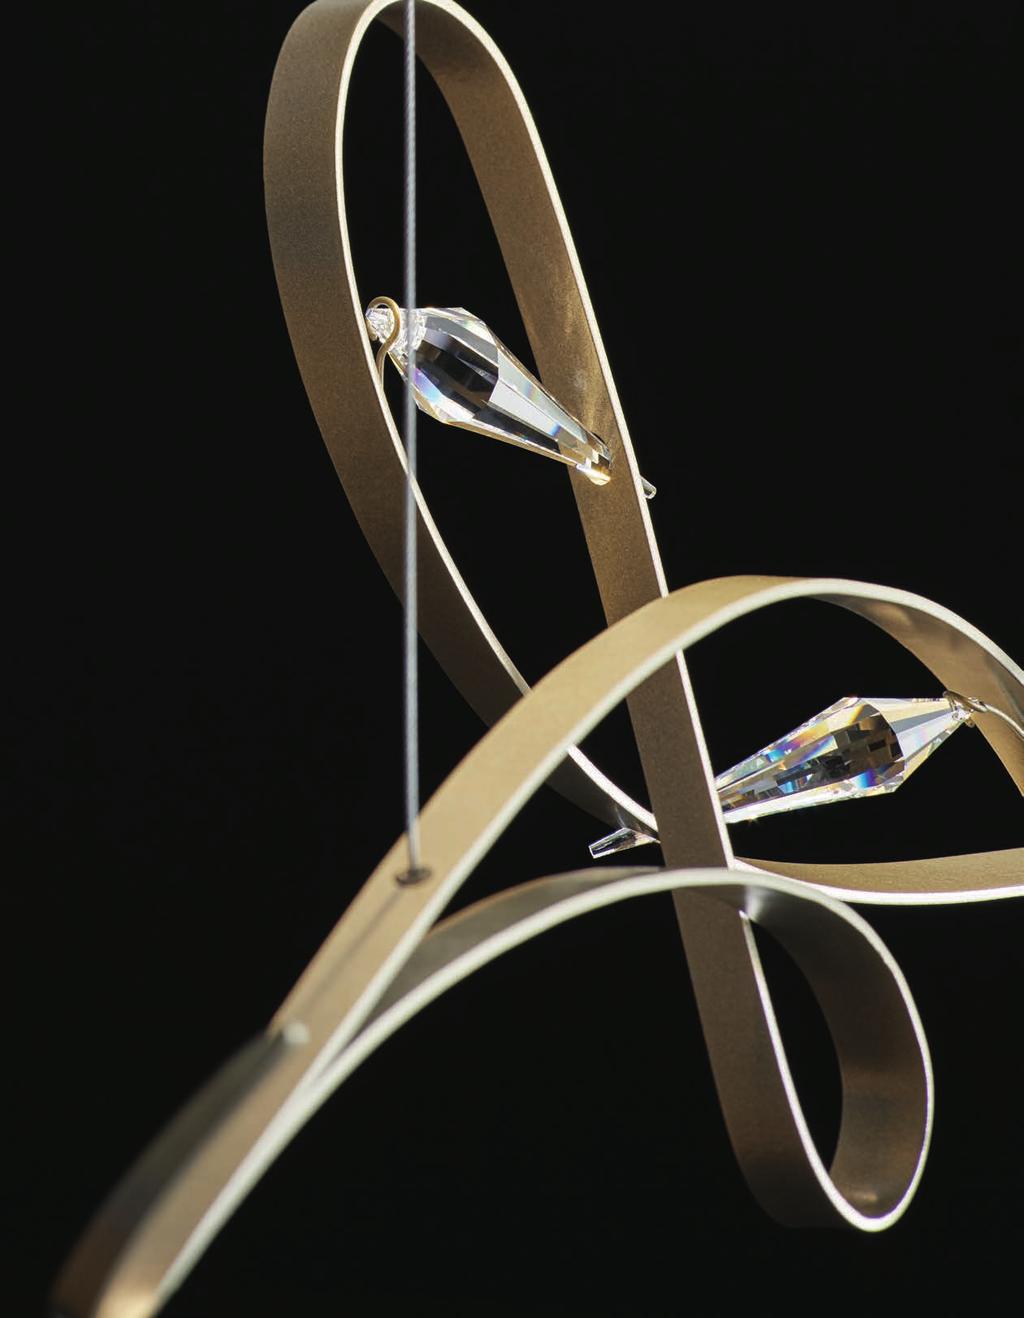 Flowing ribbons of steel are pierced by cone-shaped Swarovski